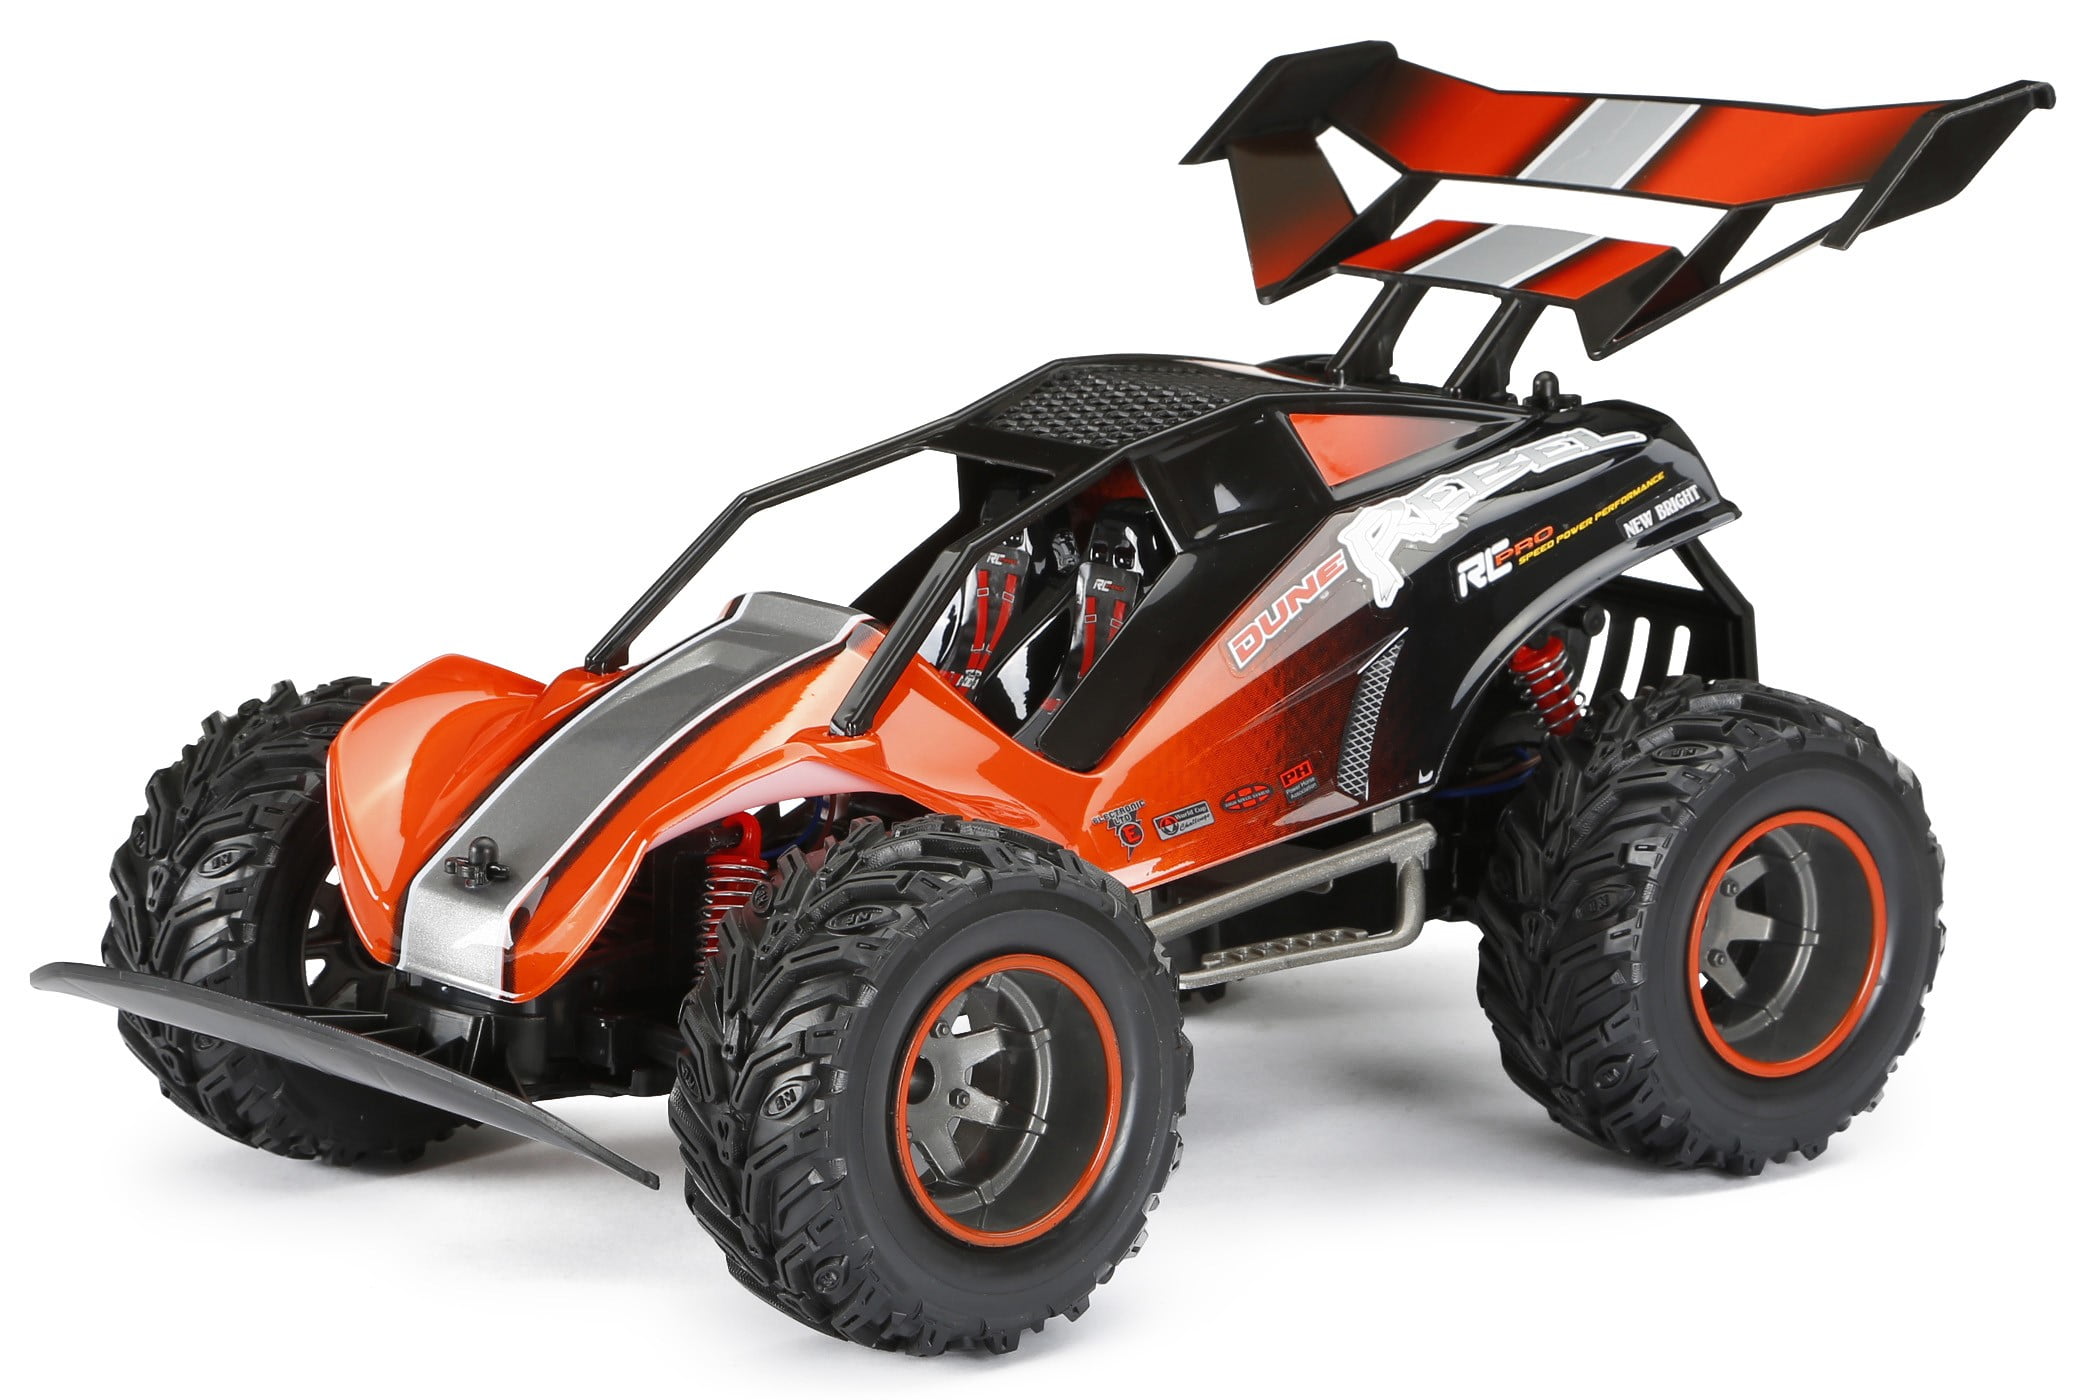 New Bright RC Pro 1:12 Scale Radio Controlled Dune Rebel 2.4GHz 9.6V